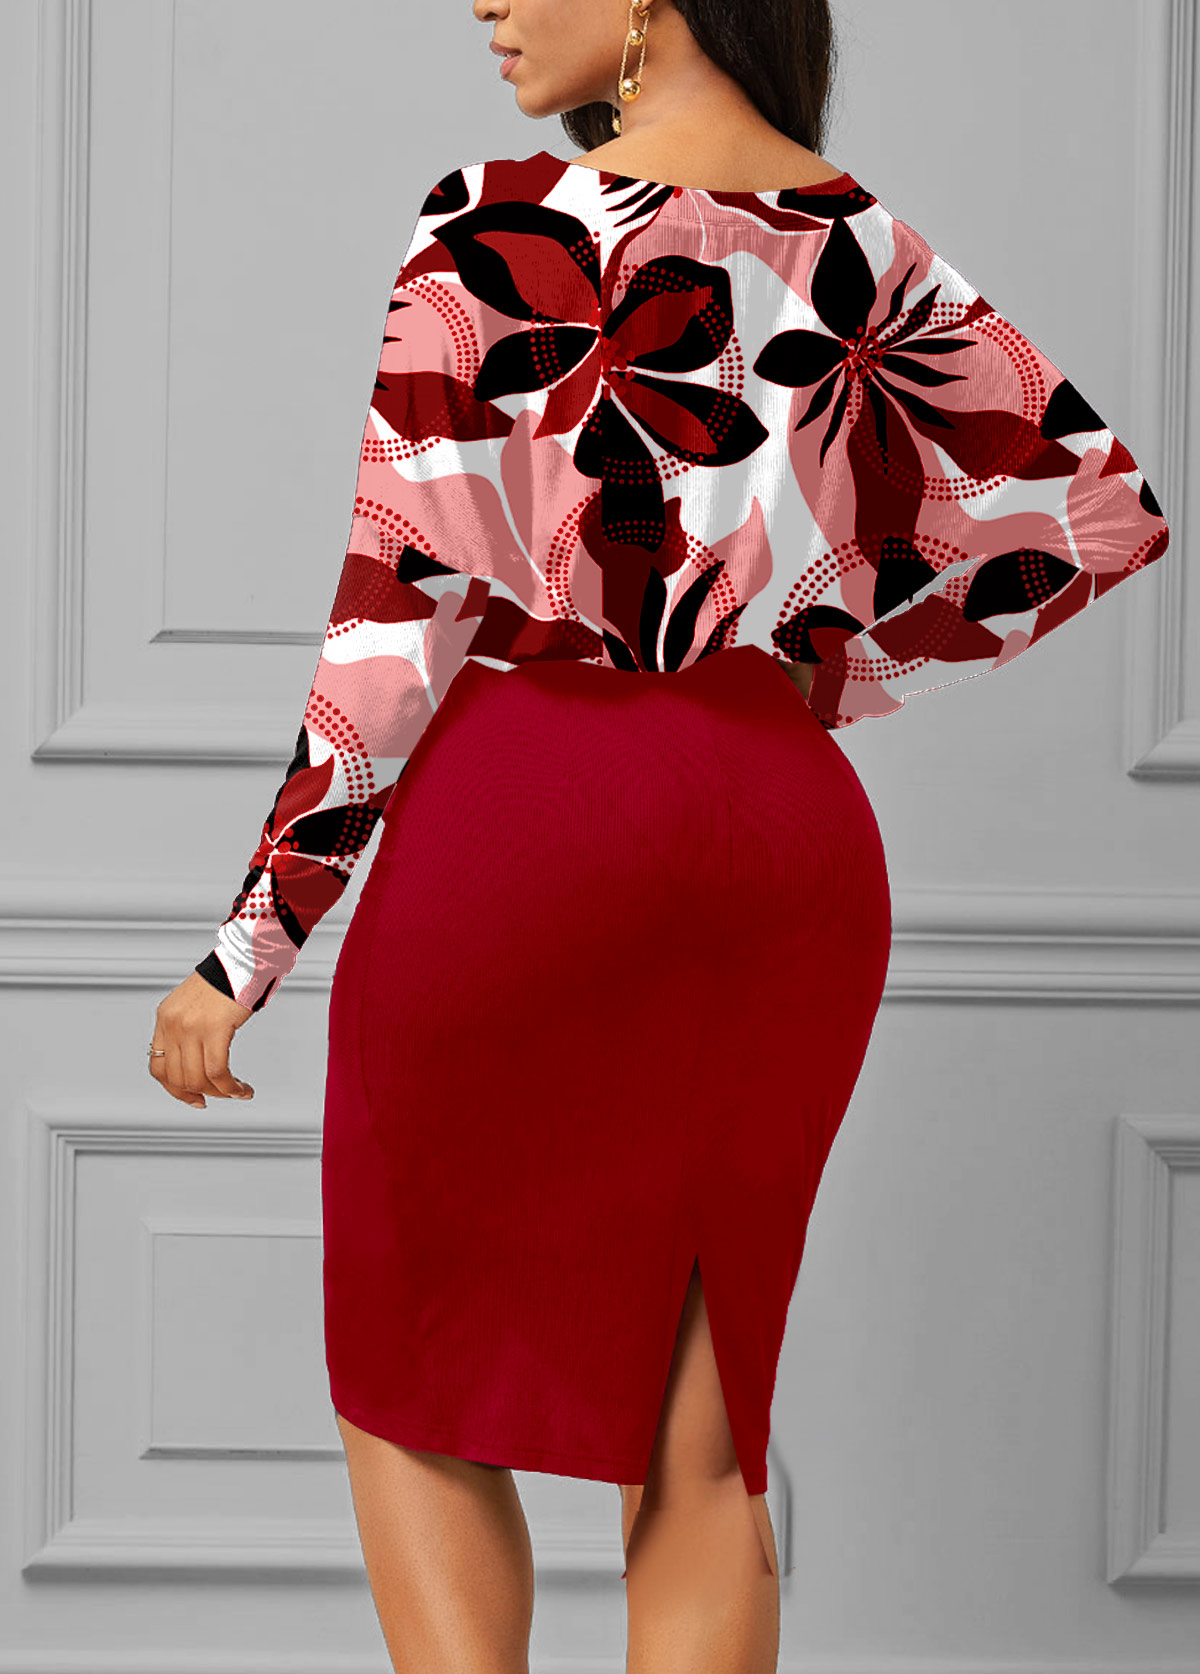 Floral Print Shirred Red Boat Neck Bodycon Dress